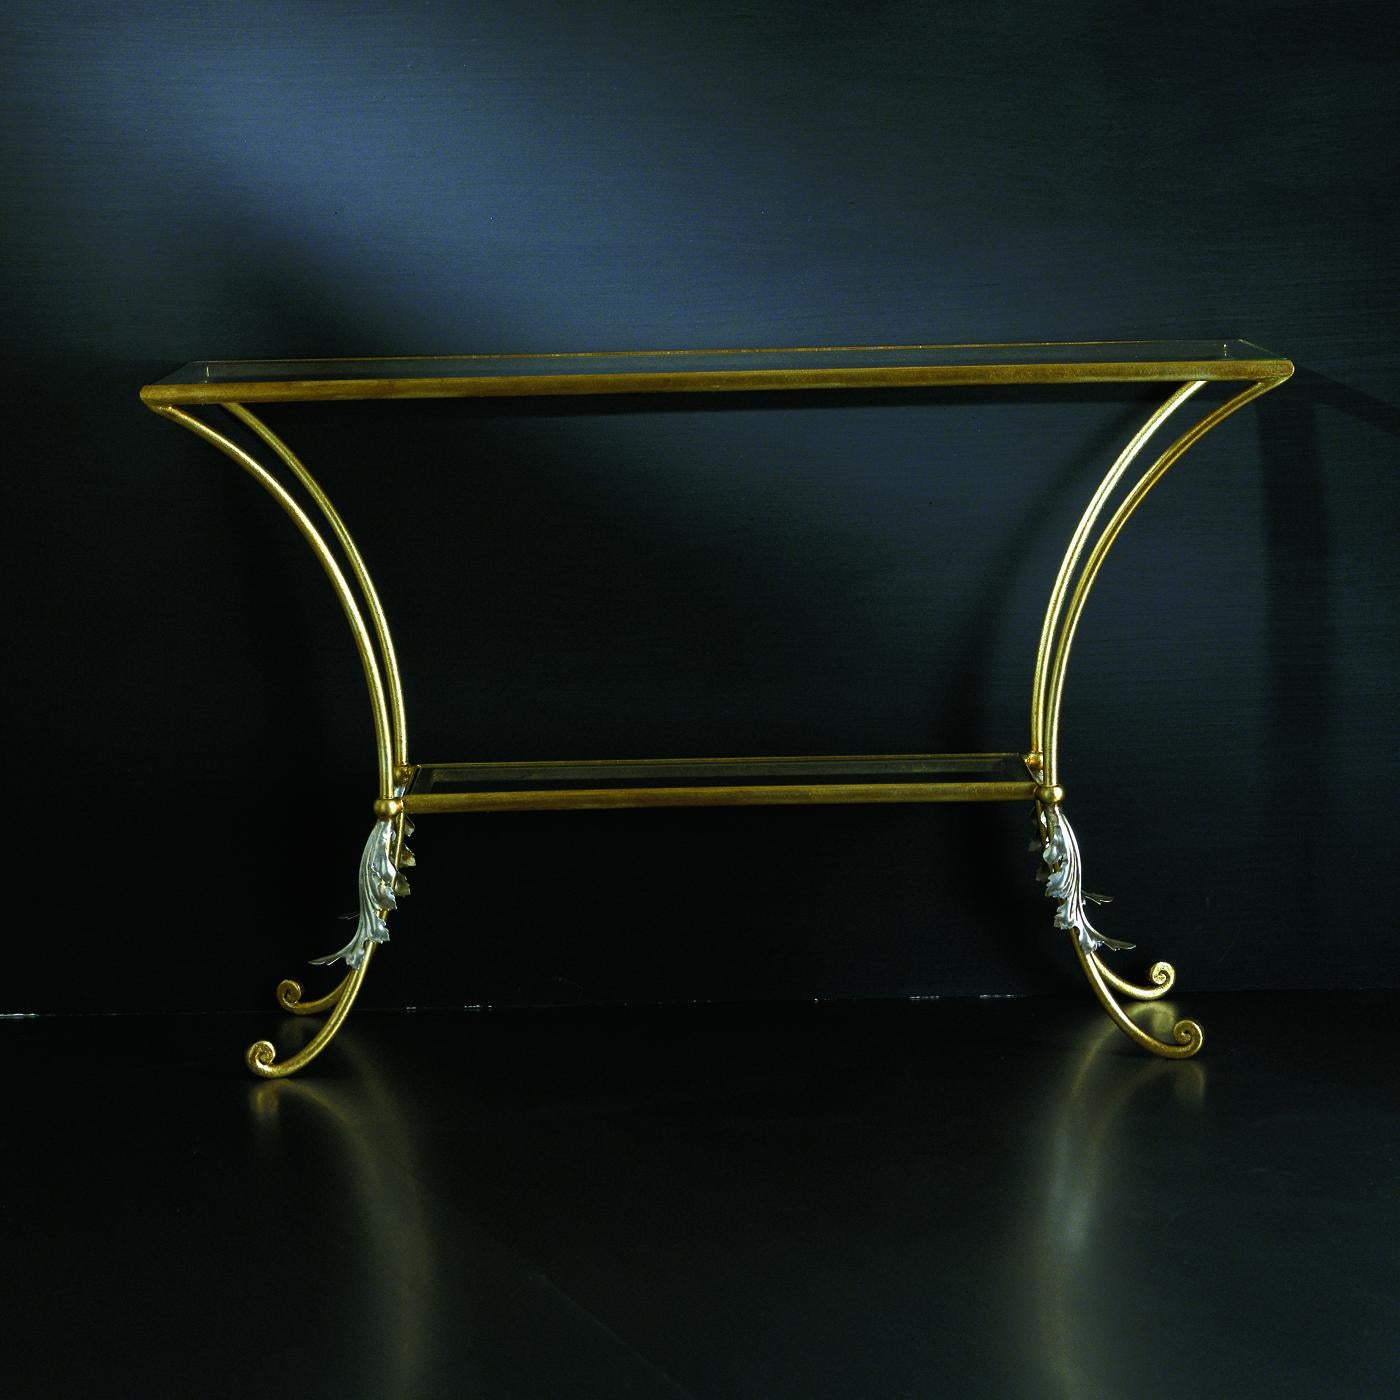 Placed behind a living room sofa or in an entryway, this French-style console will add a vintage accent to a variety of interior decors with its open Silhouette and understated elegance. Crafted of wrought iron with gold finish, it features long